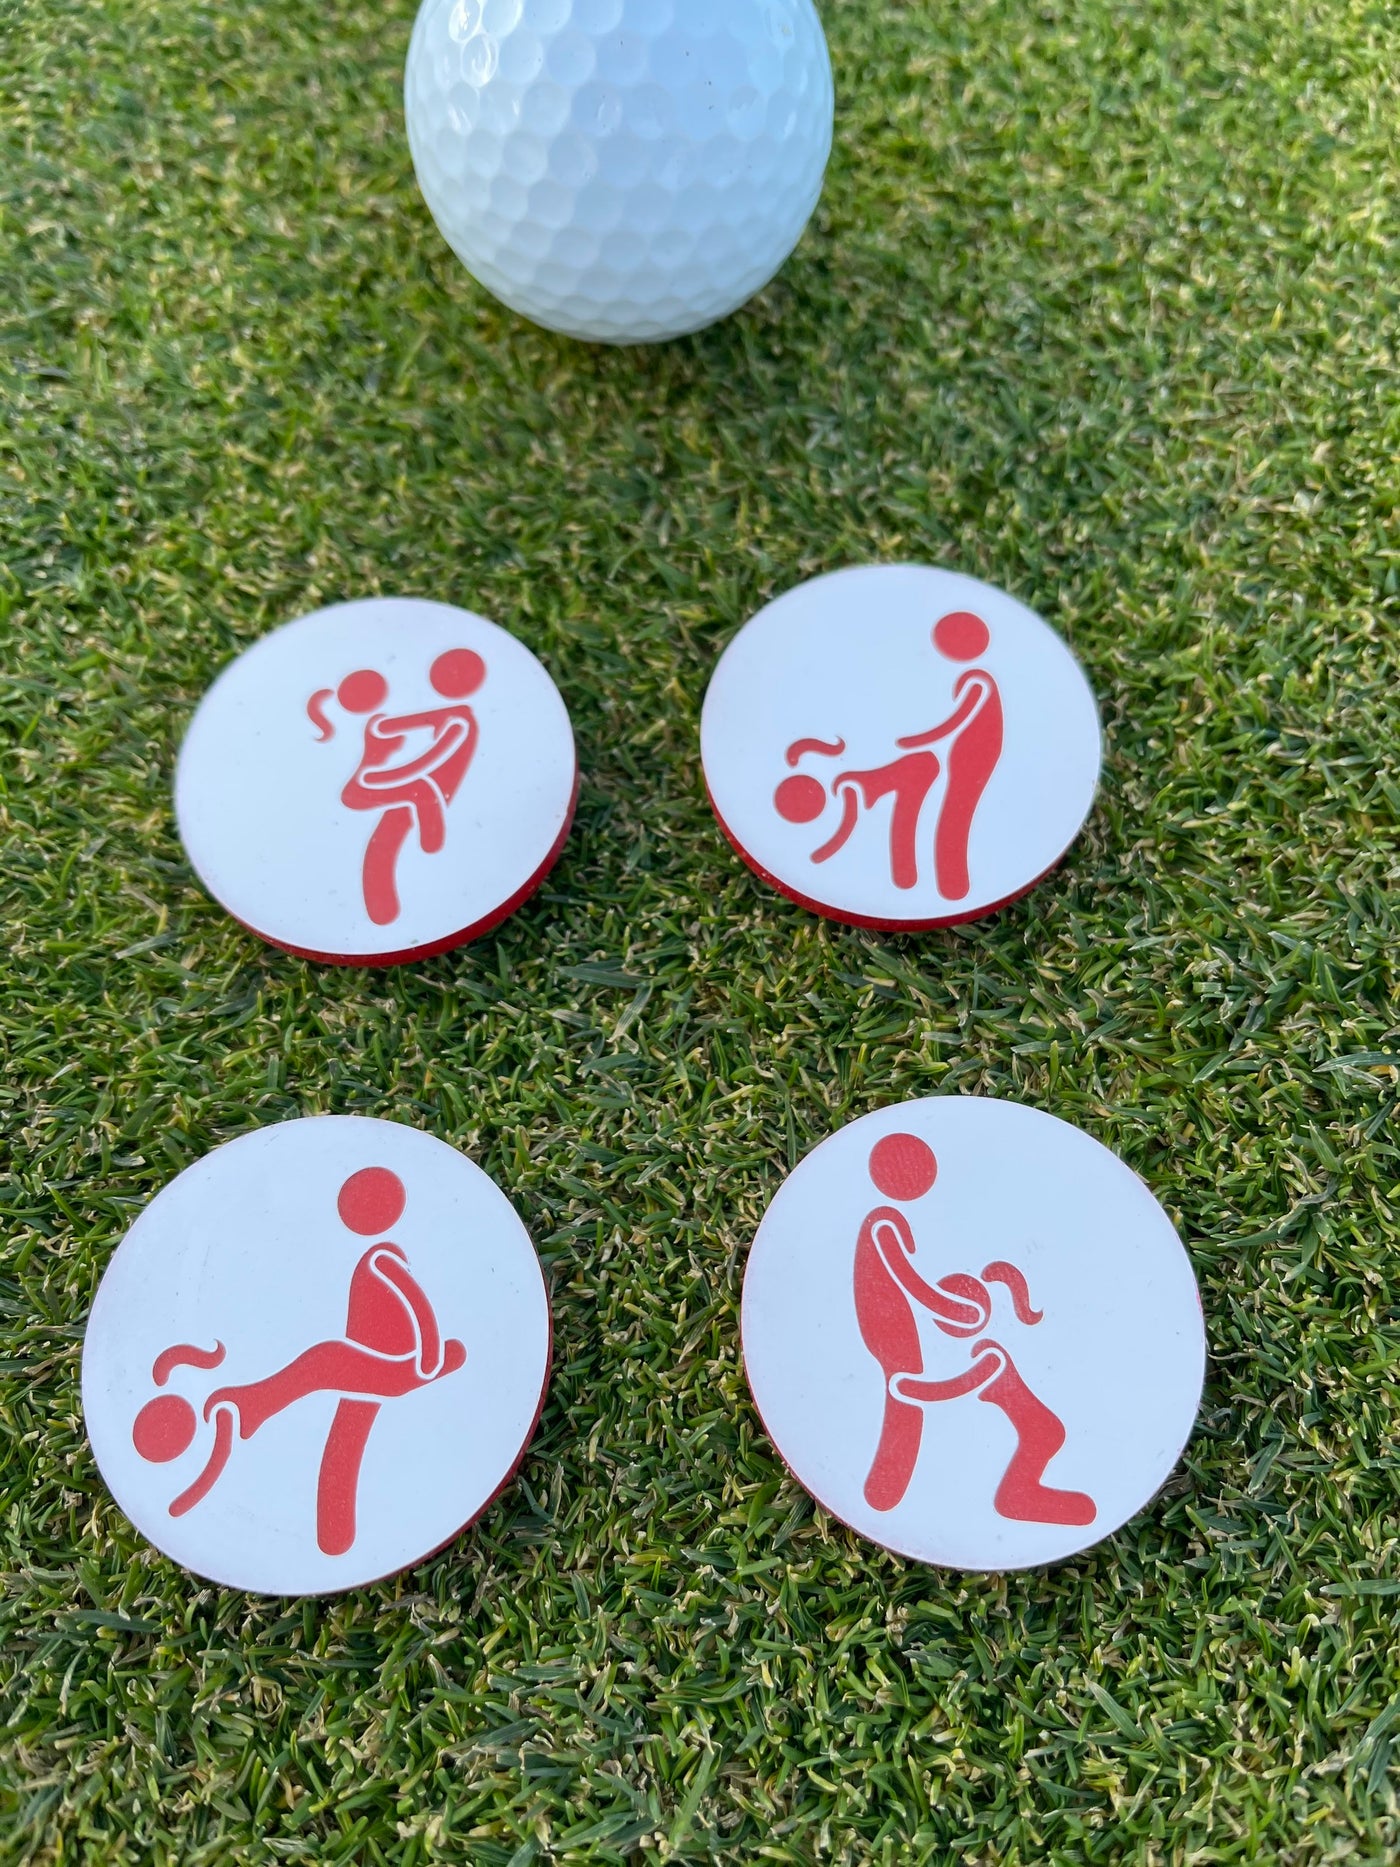 Golf Ball Markers Adult Humor Set of 4